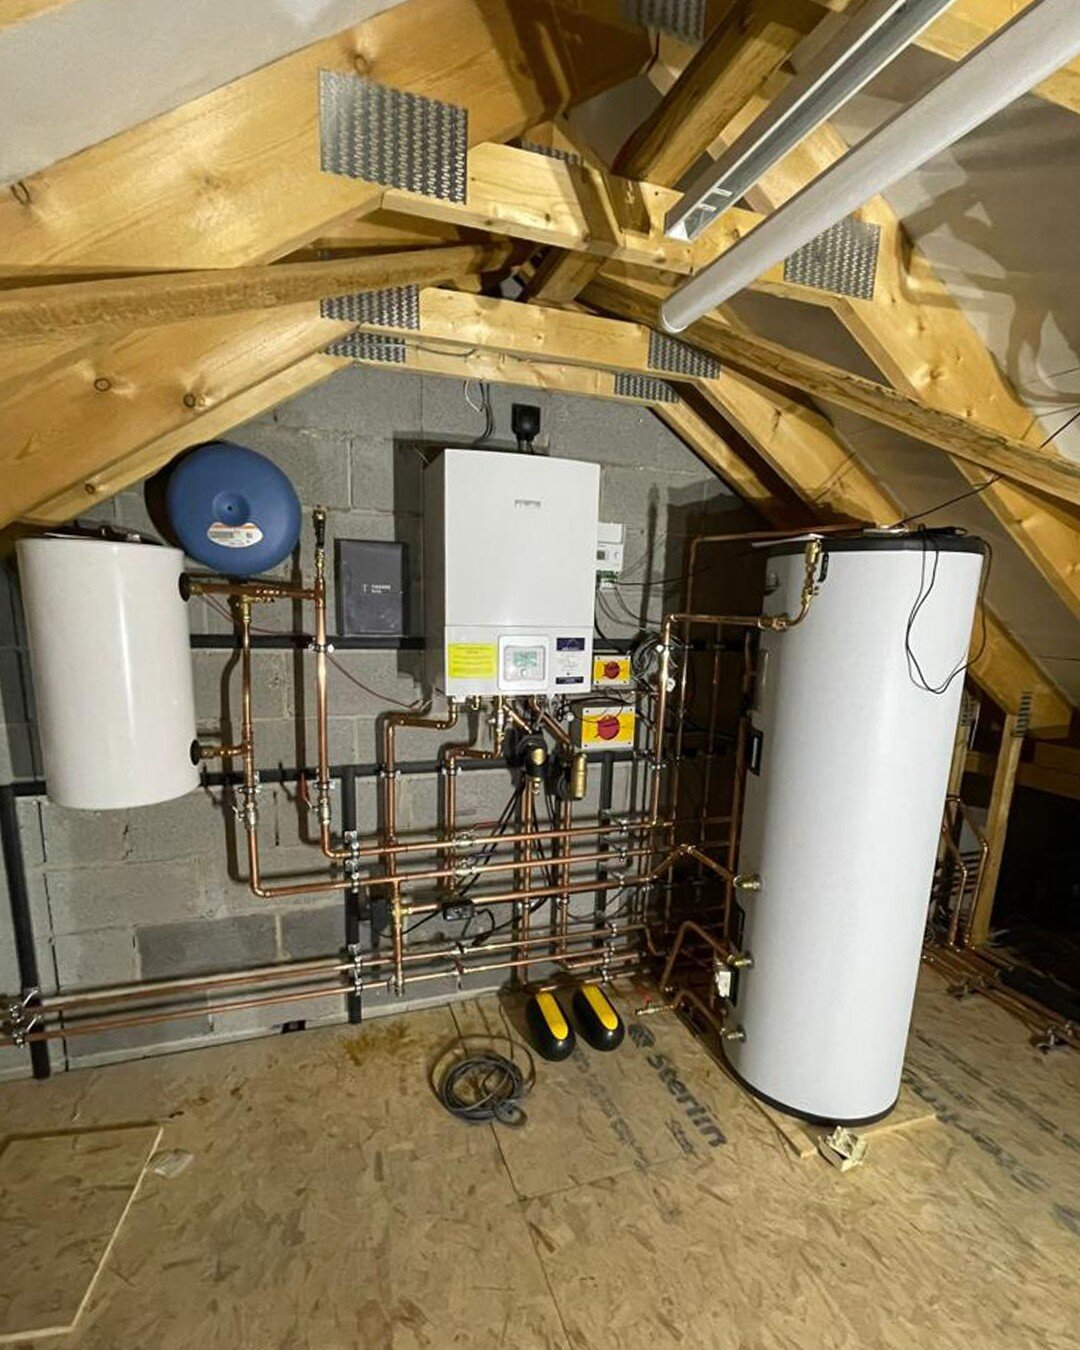 Our first heat pump install with the team at @thorpeecoltd 👏 Nice job on the pipework 🤝 Looking forward to more jobs together! 

Whatever heat pump job you've got in the pipeline, we're happy to help. In a nutshell, we take care of the design, supp